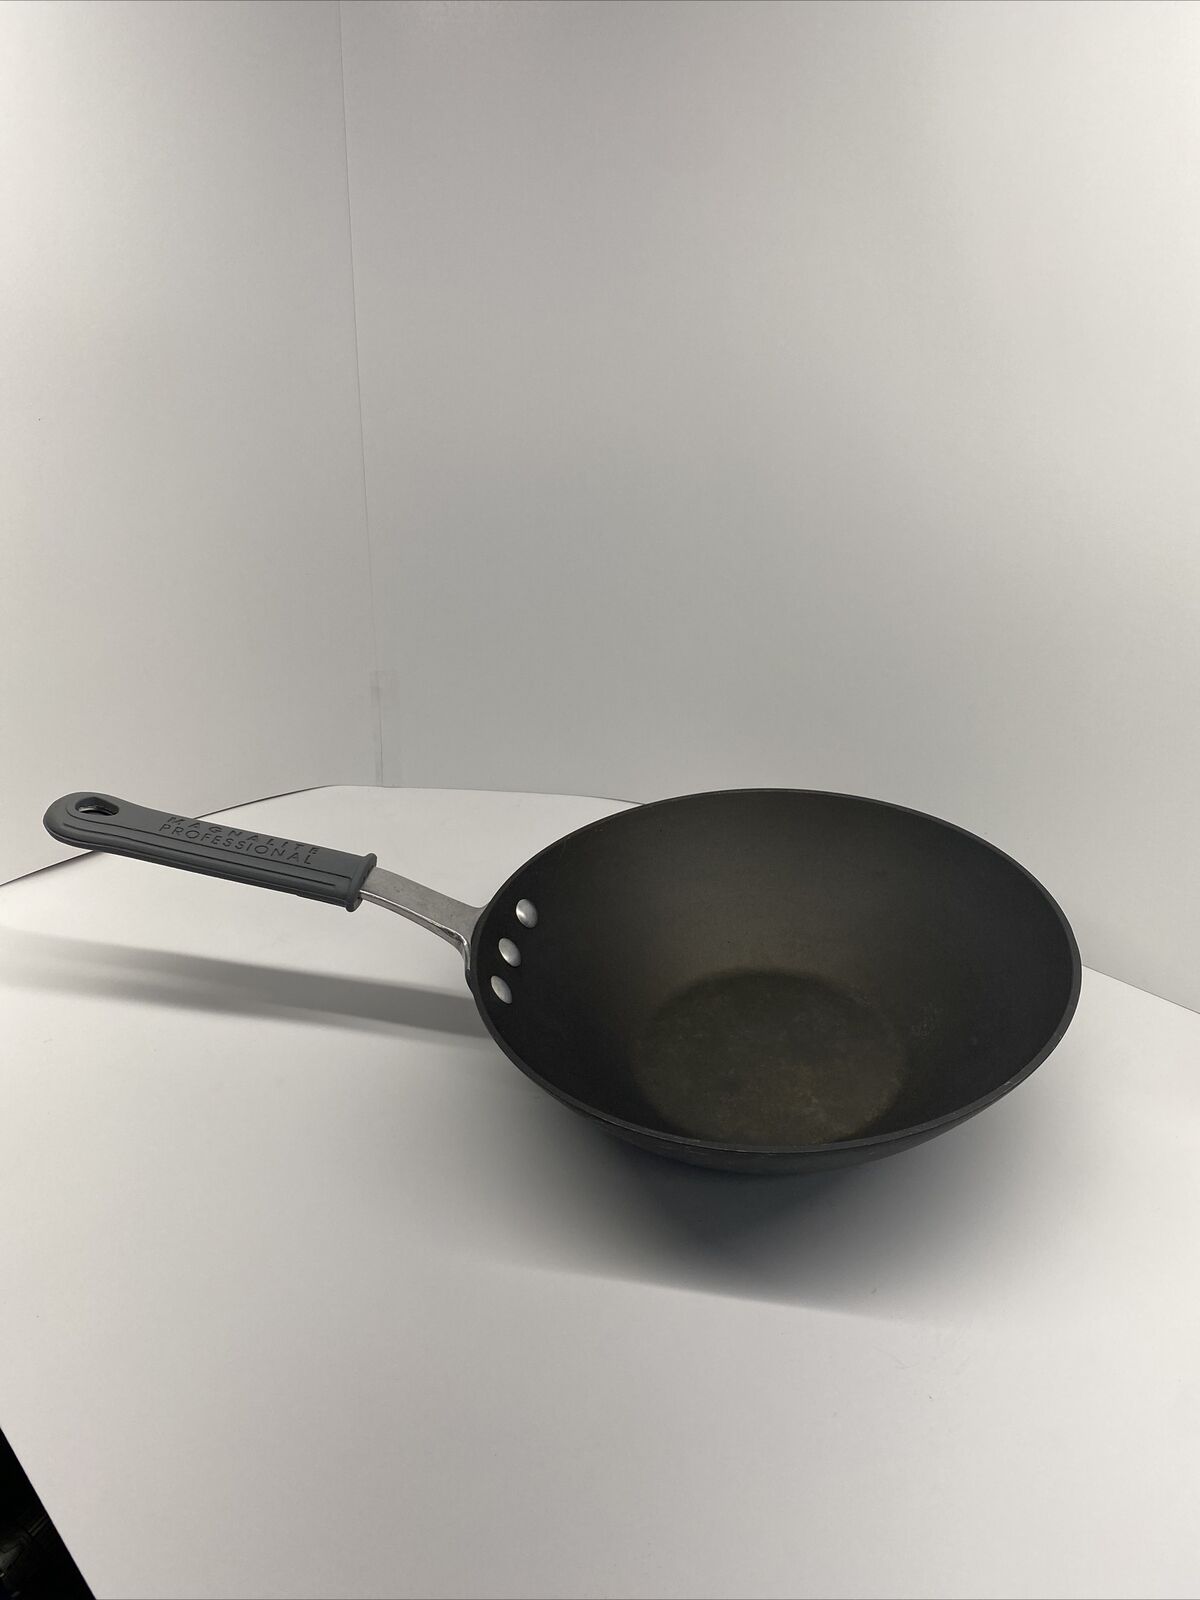 Magnalite Professional 10 Inch Pan With Lid